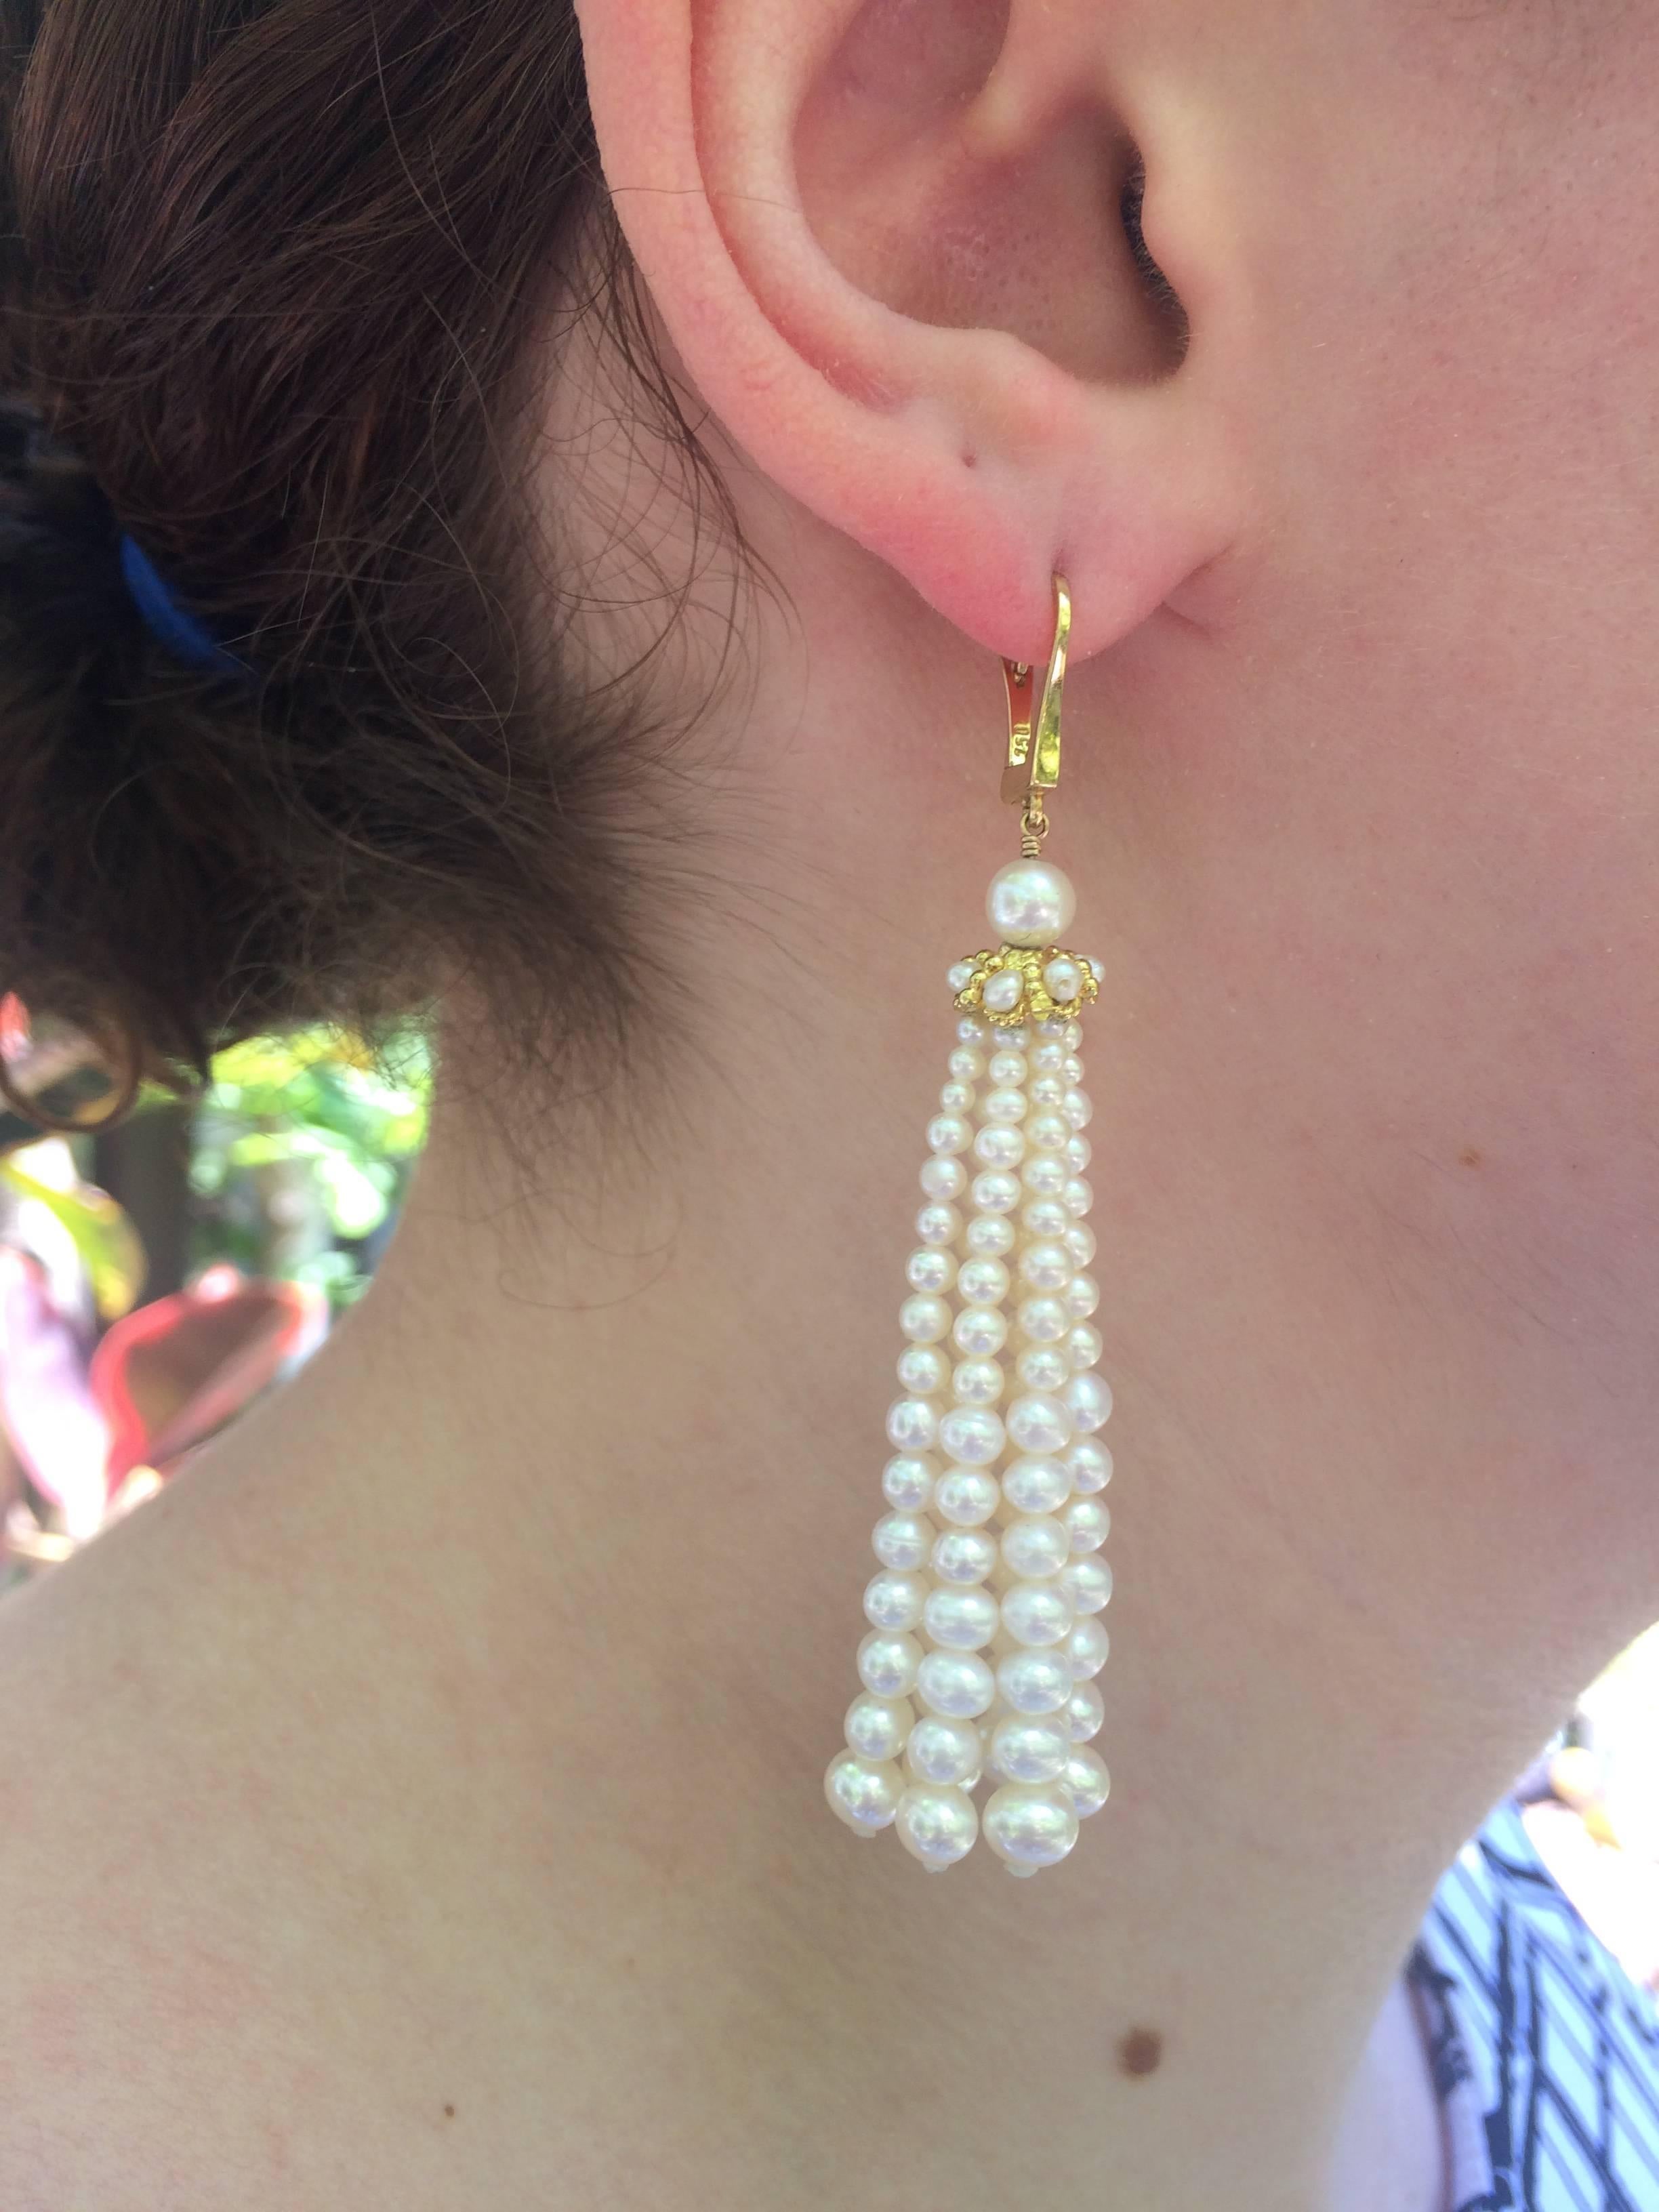 Graduated fine cultured pearl earrings measures 3 inches from top of ear wire. Pearl strands hang from yelloe gold cups detailed with pearls. 14k yellow gold earwires.